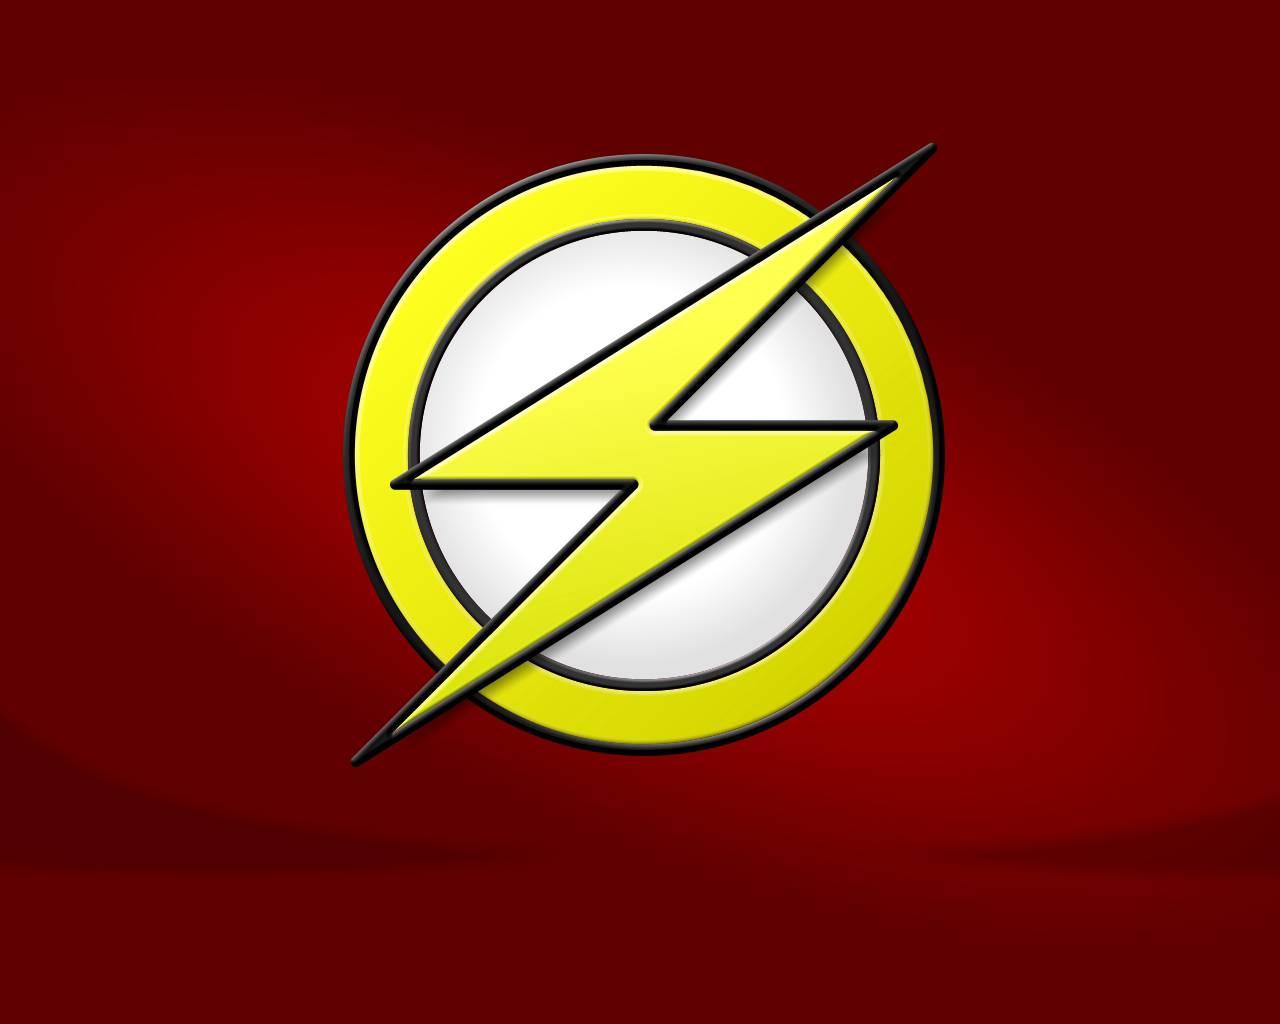 the flash wallpaper   5975   High Quality and Resolution Wallpapers